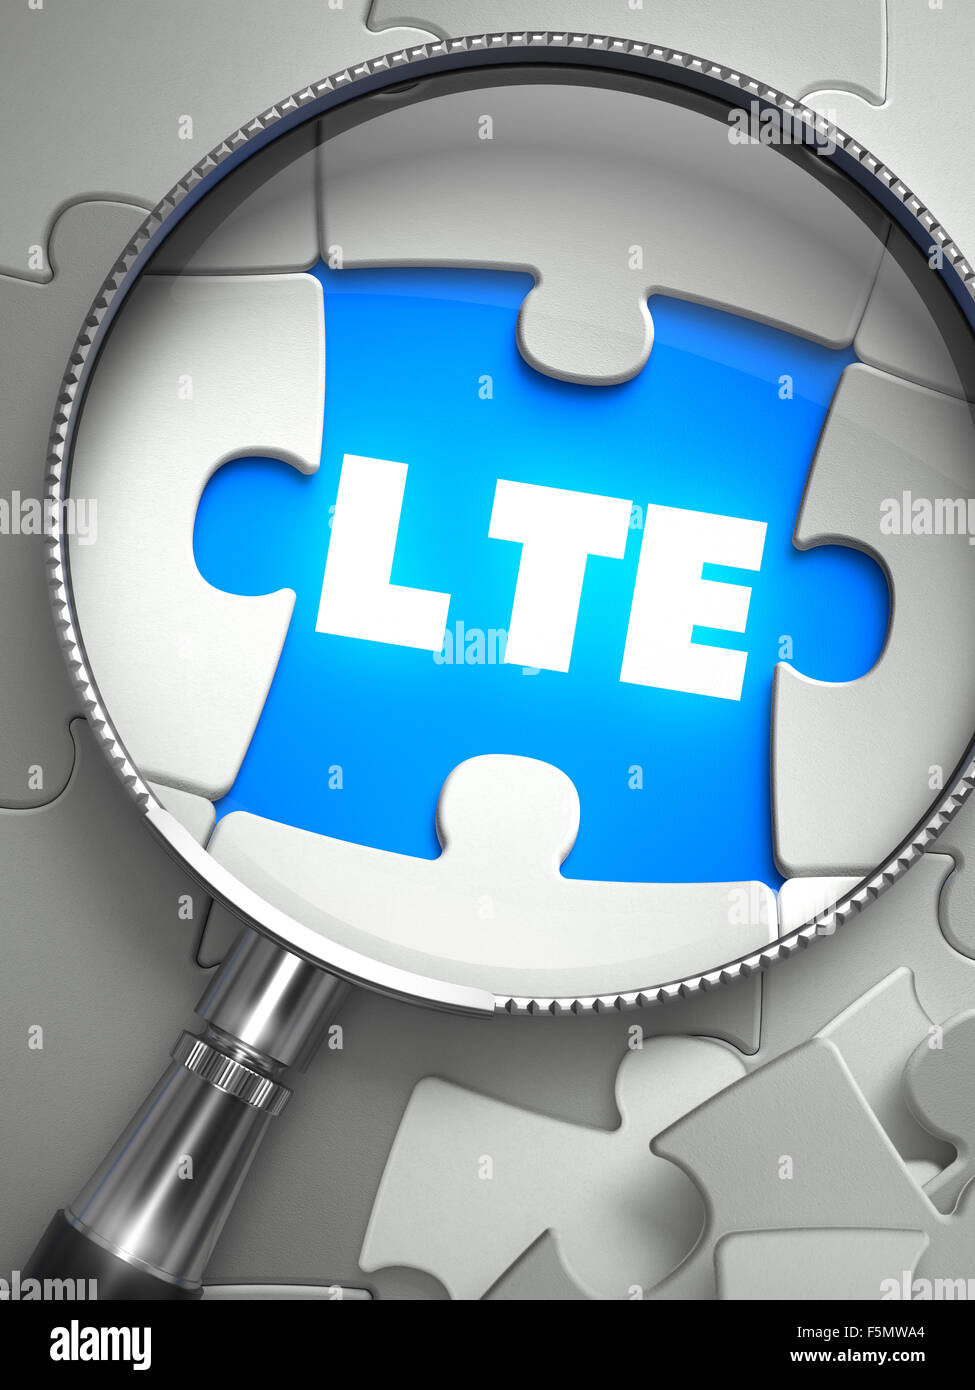 LTE - Long Term Evolution -on the Place of Missing Puzzle Piece through Magnifier. Selective Focus. Stock Photo